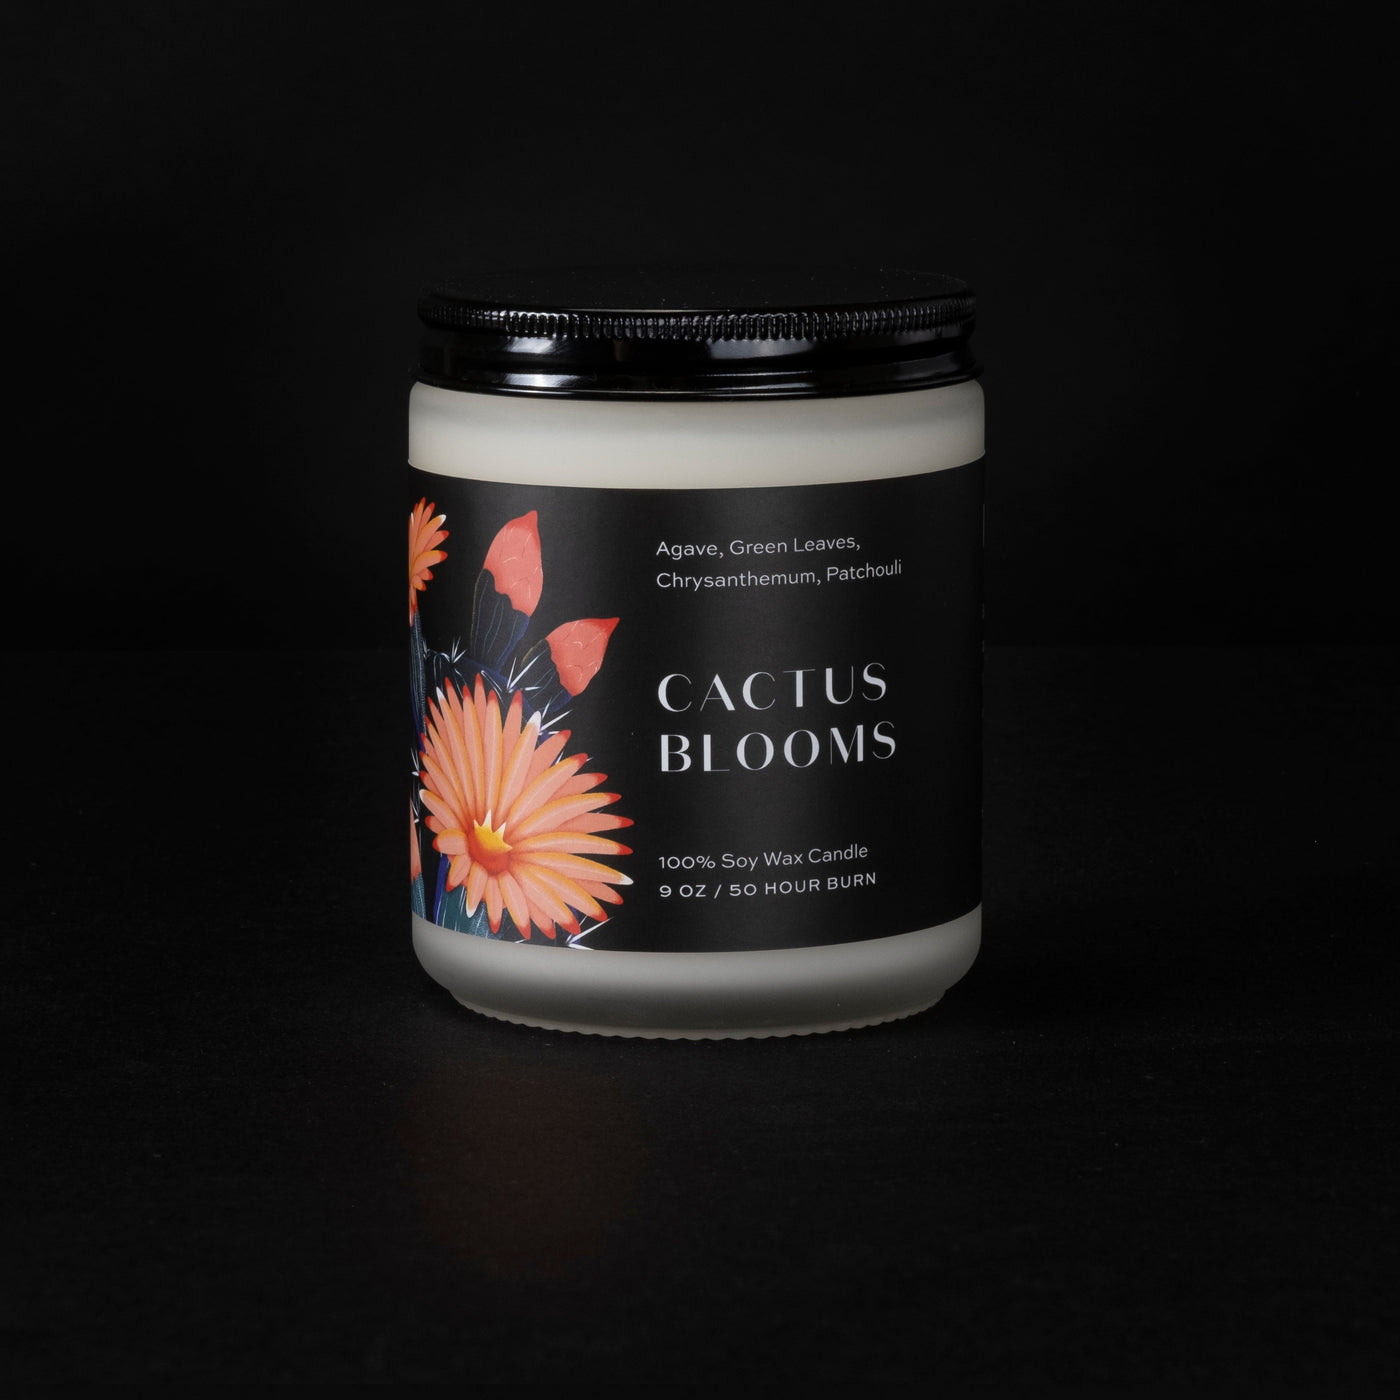 Cactus Blooms Soy Candle